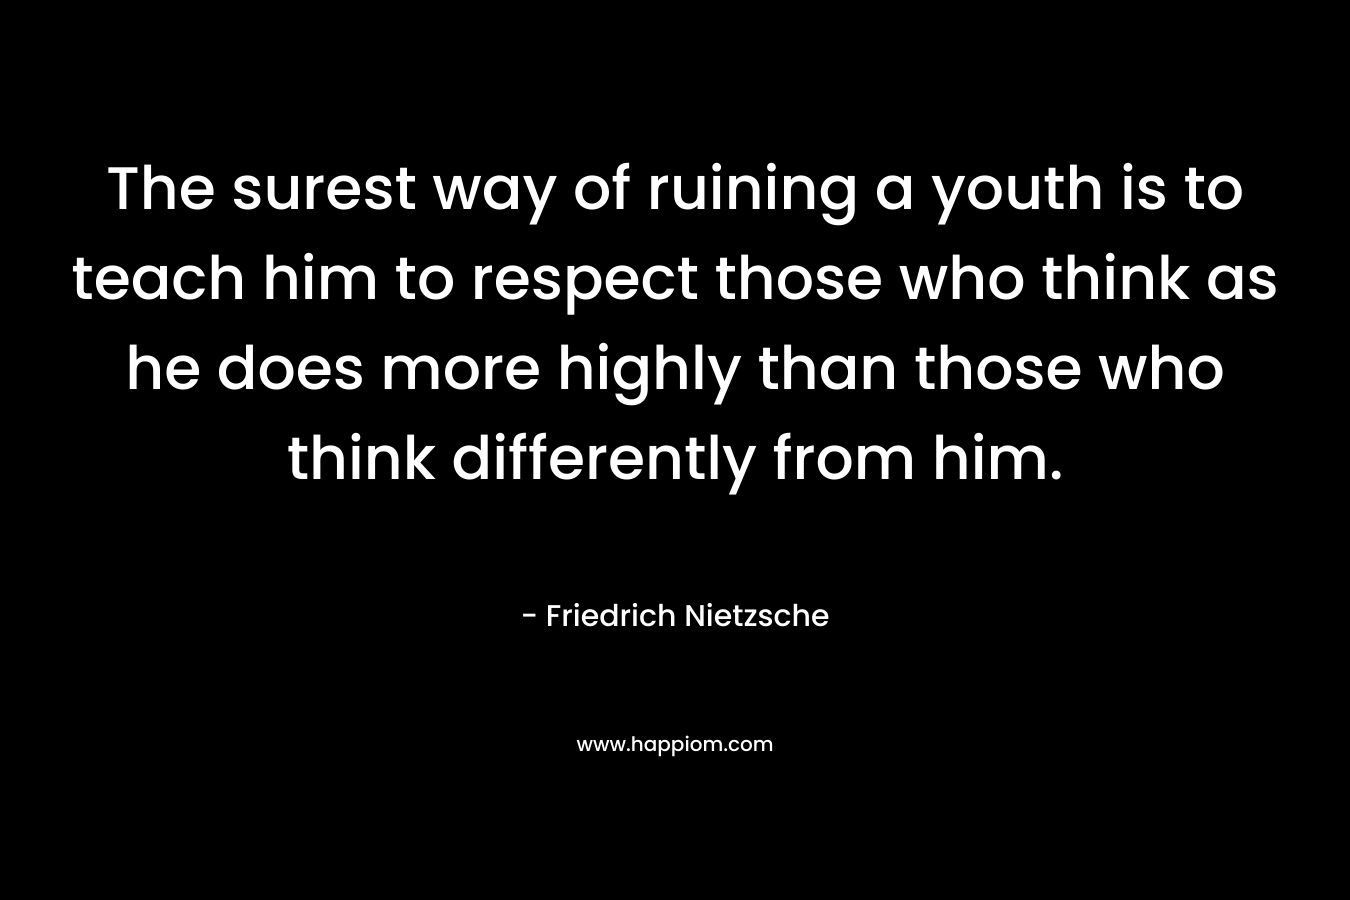 The surest way of ruining a youth is to teach him to respect those who think as he does more highly than those who think differently from him.